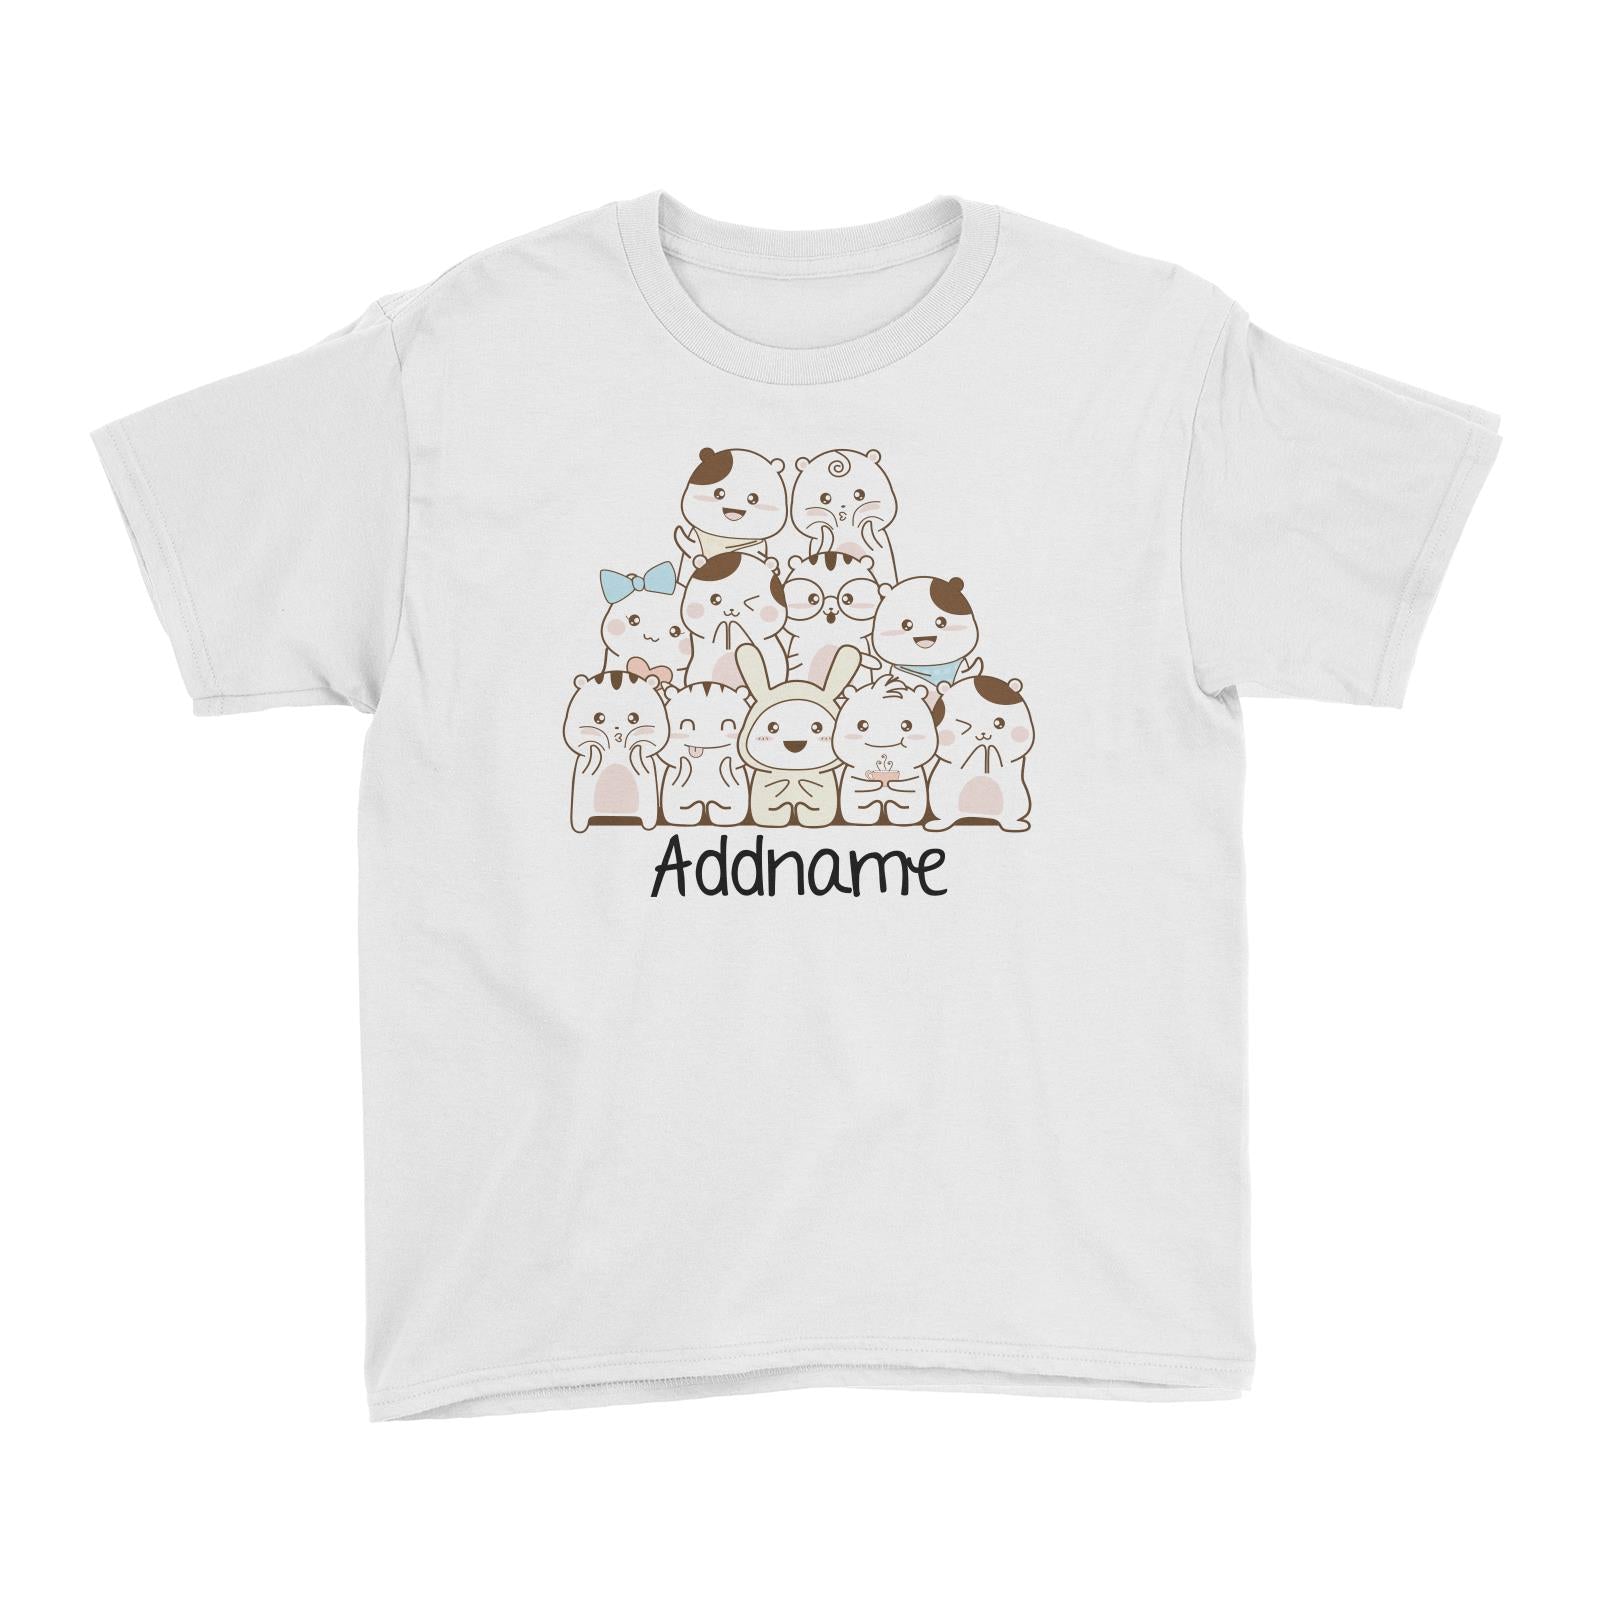 Cute Animals And Friends Series Cute Hamster Group Addname Kid's T-Shirt